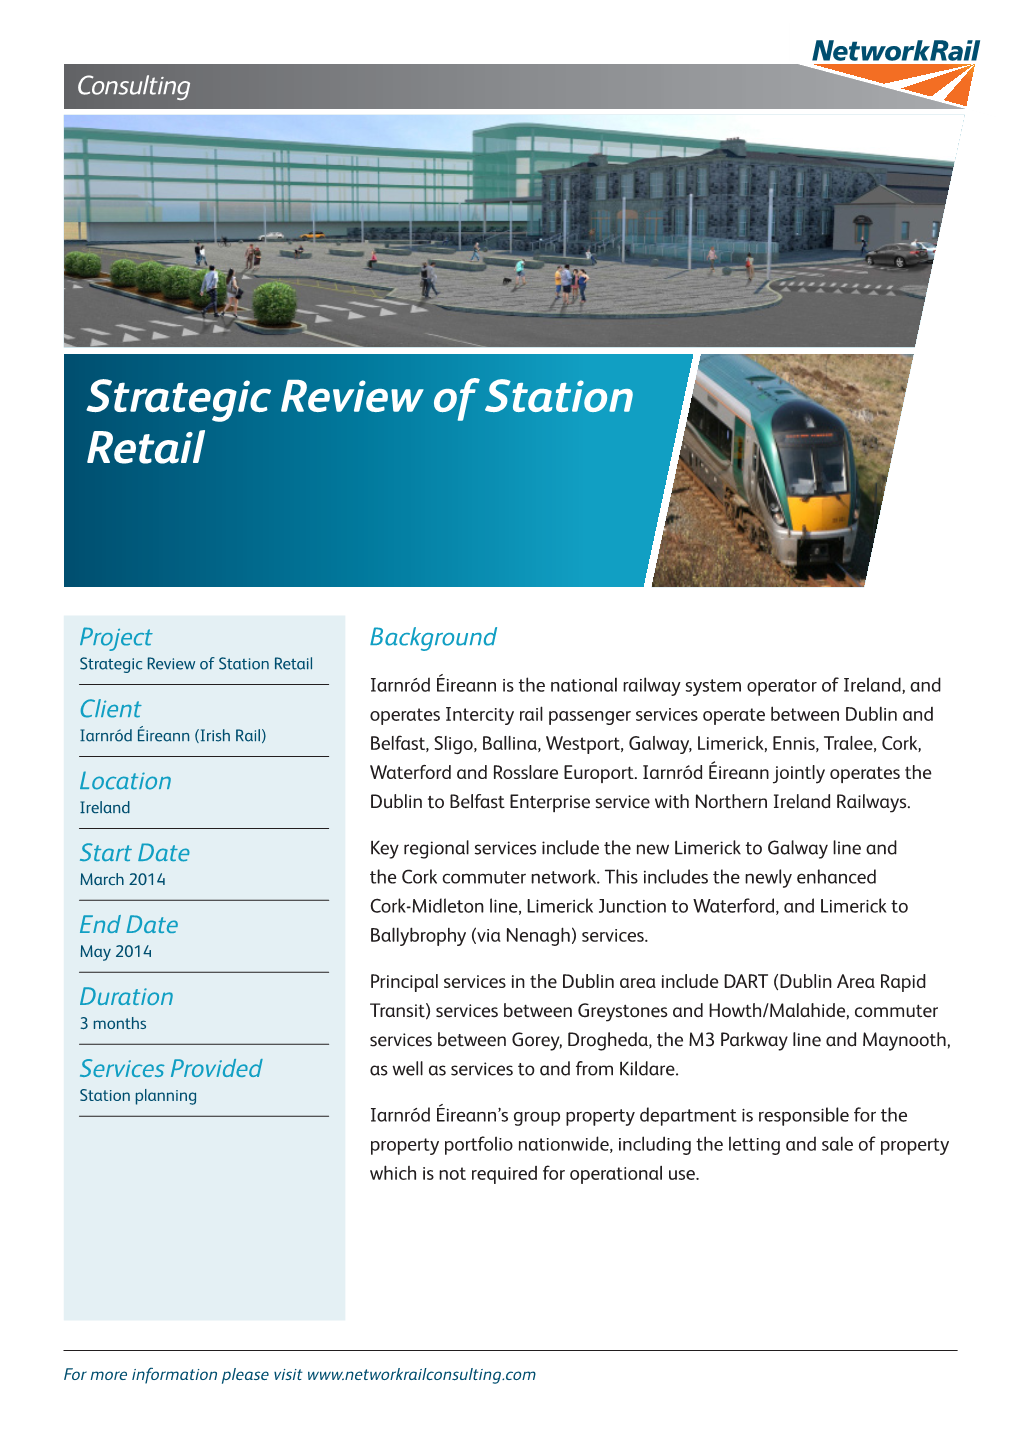 Strategic Review of Station Retail